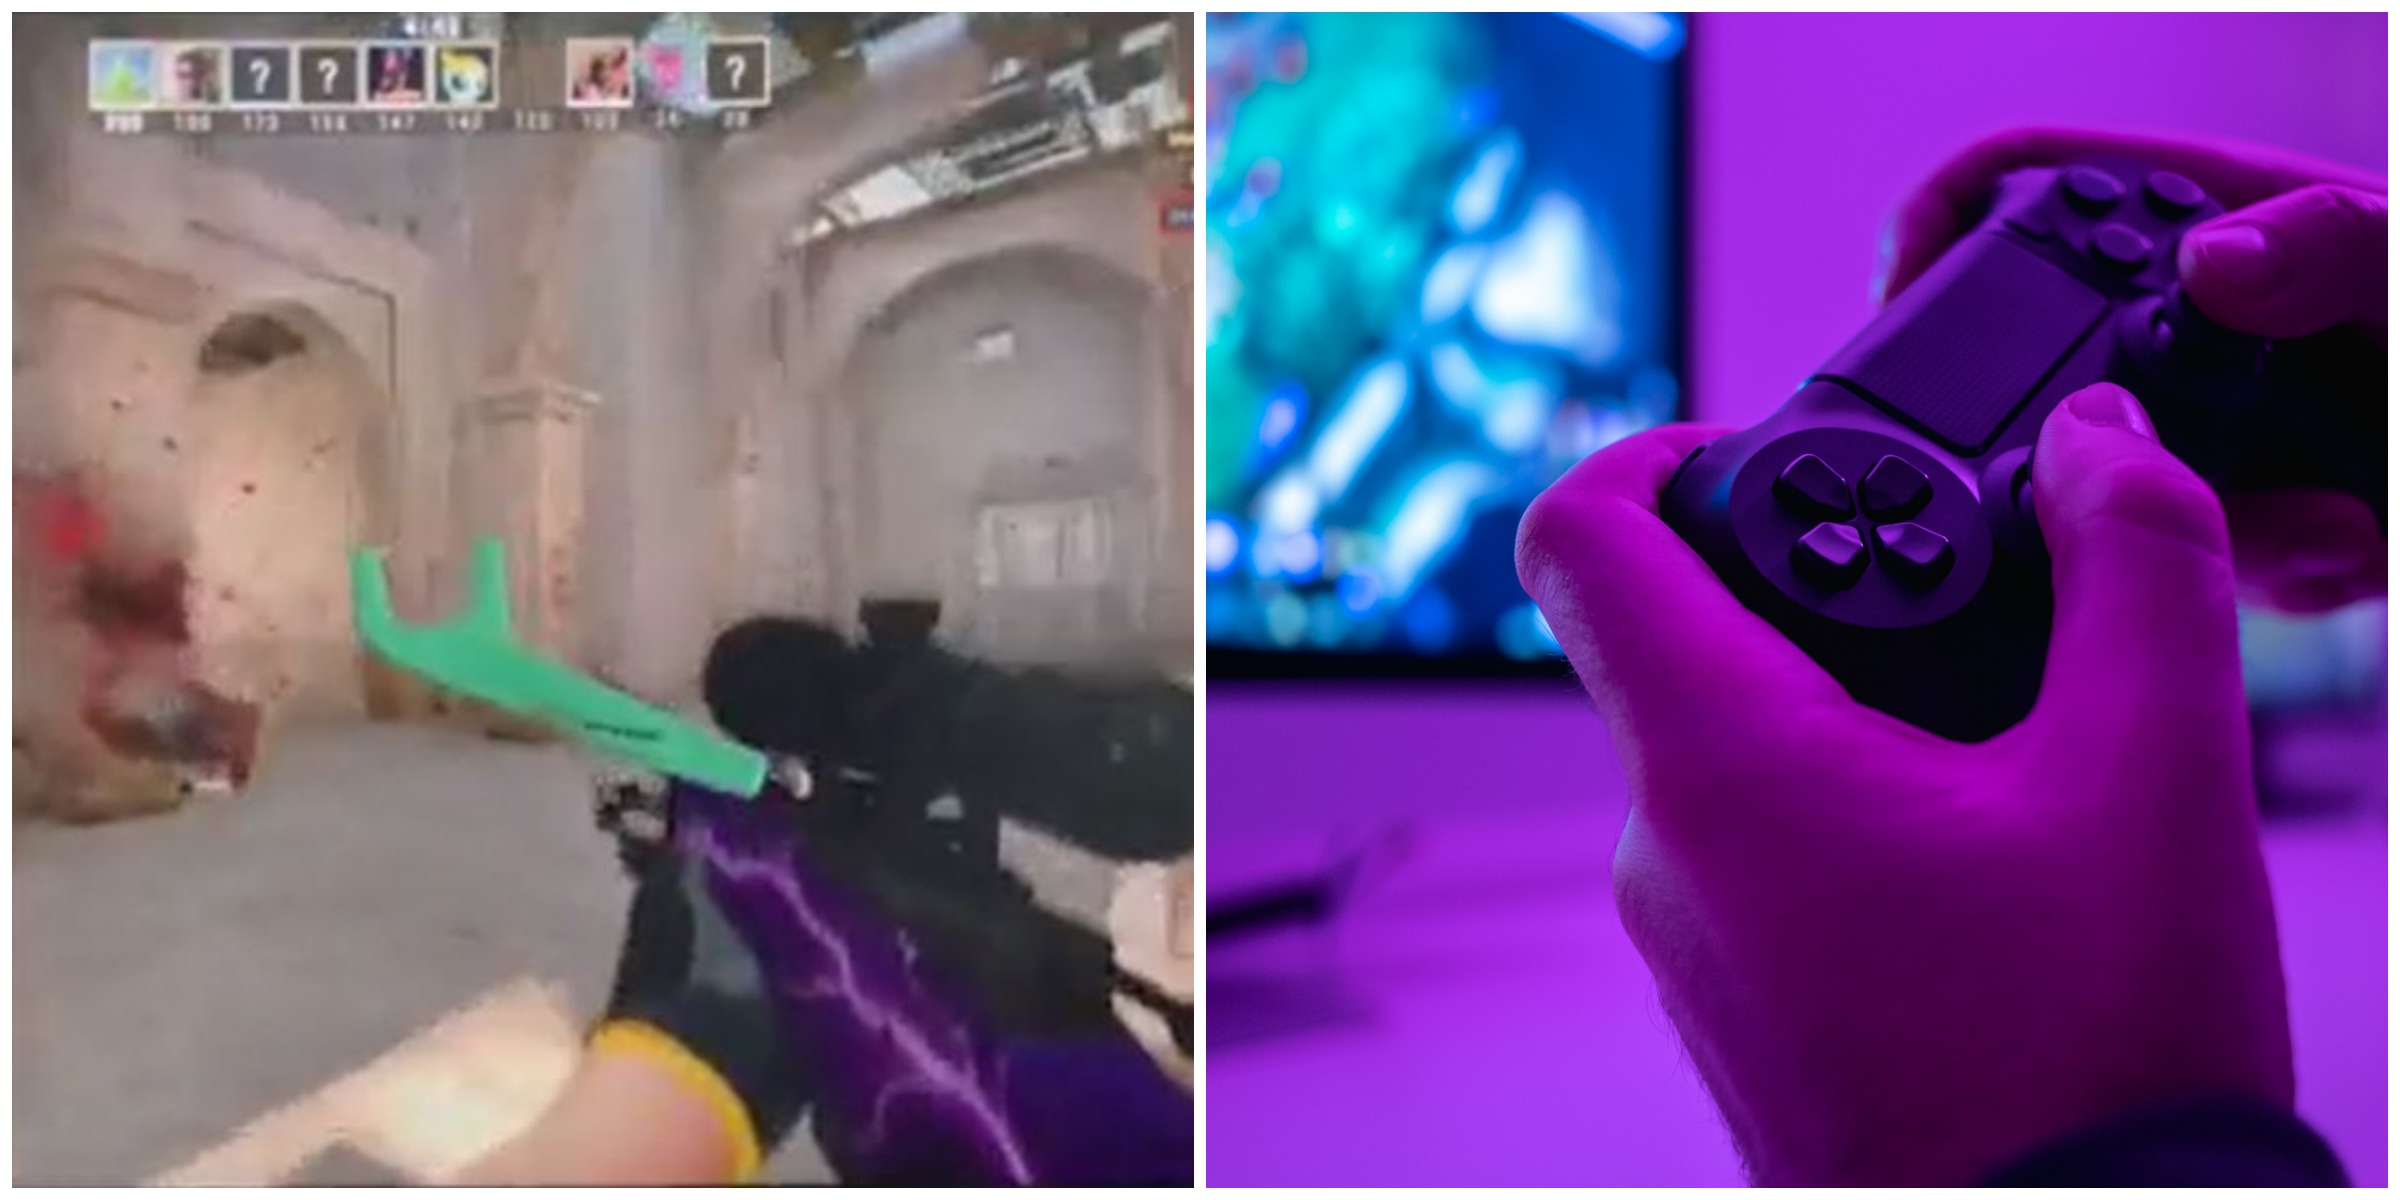 Dentist Reveals How a Floss Pick Can Turn You Into a ‘Major League Gamer’